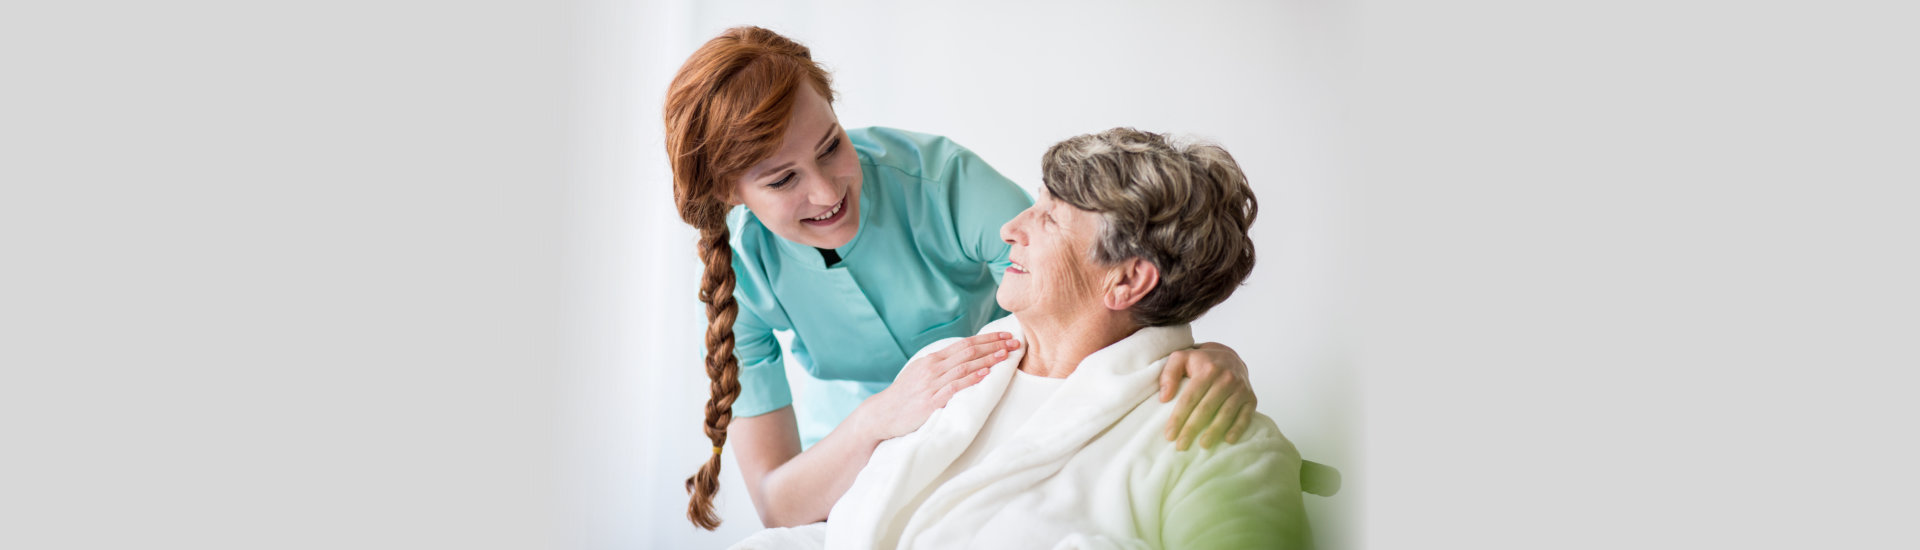 caregiver talking to her patient